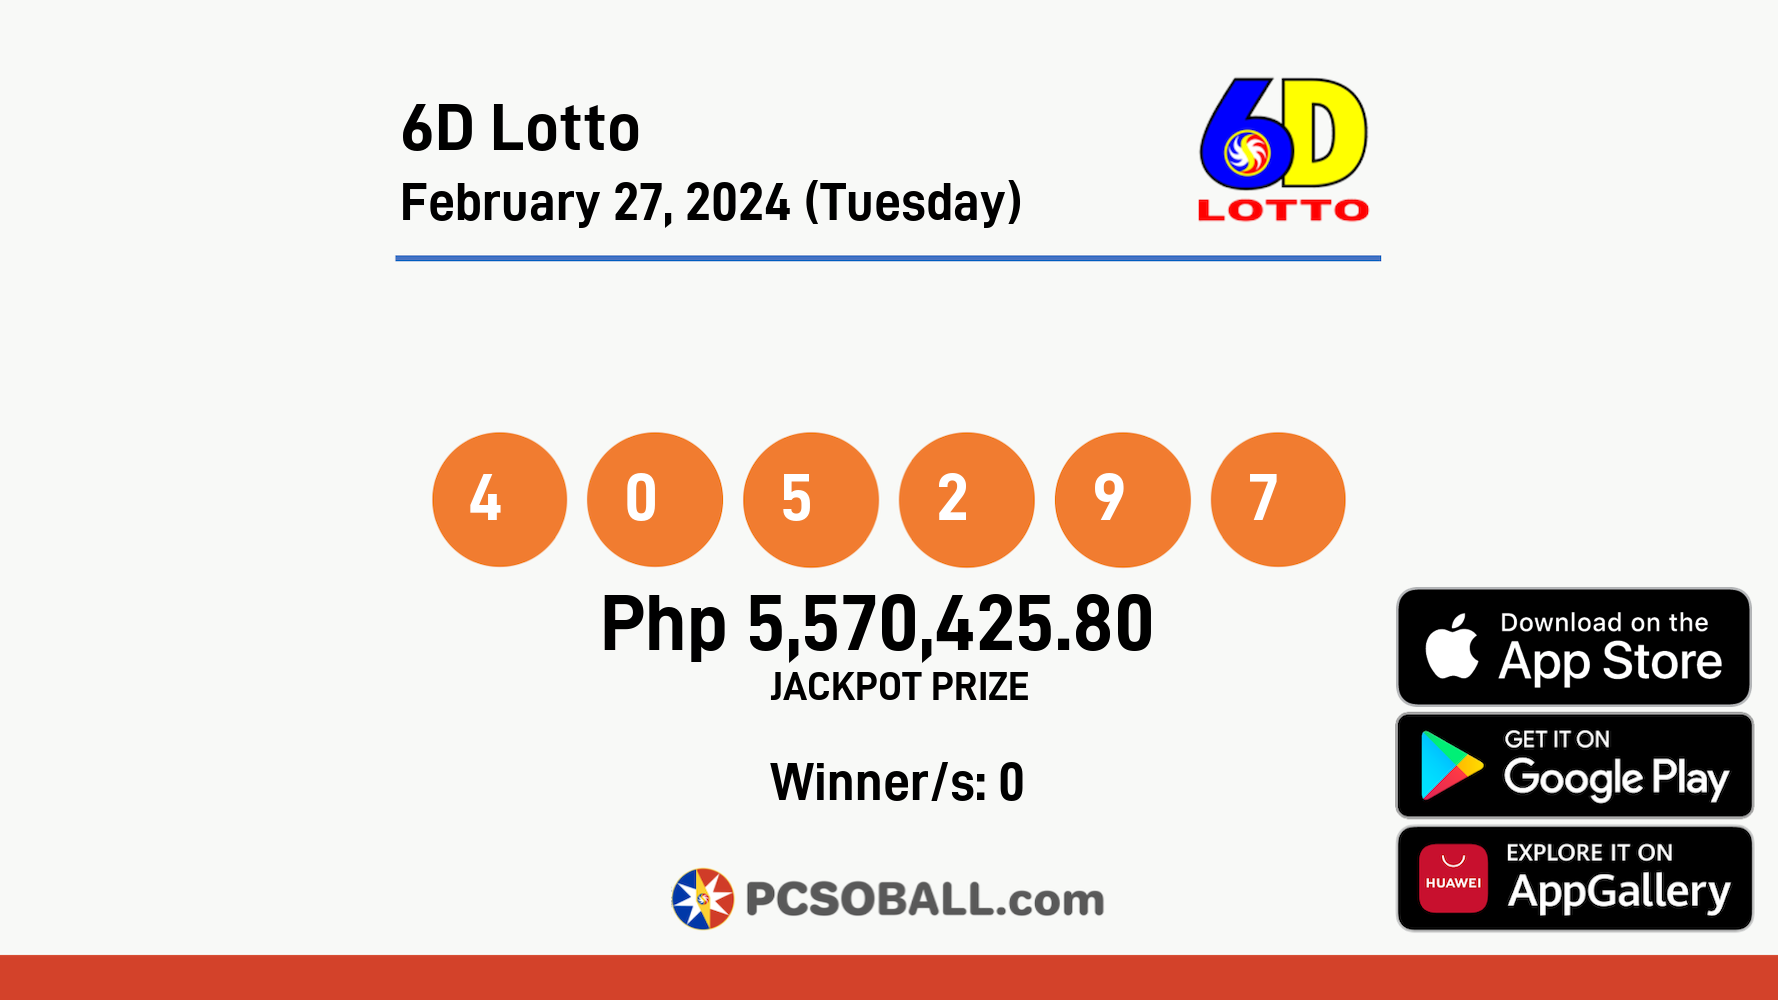 6D Lotto February 27, 2024 (Tuesday) Result